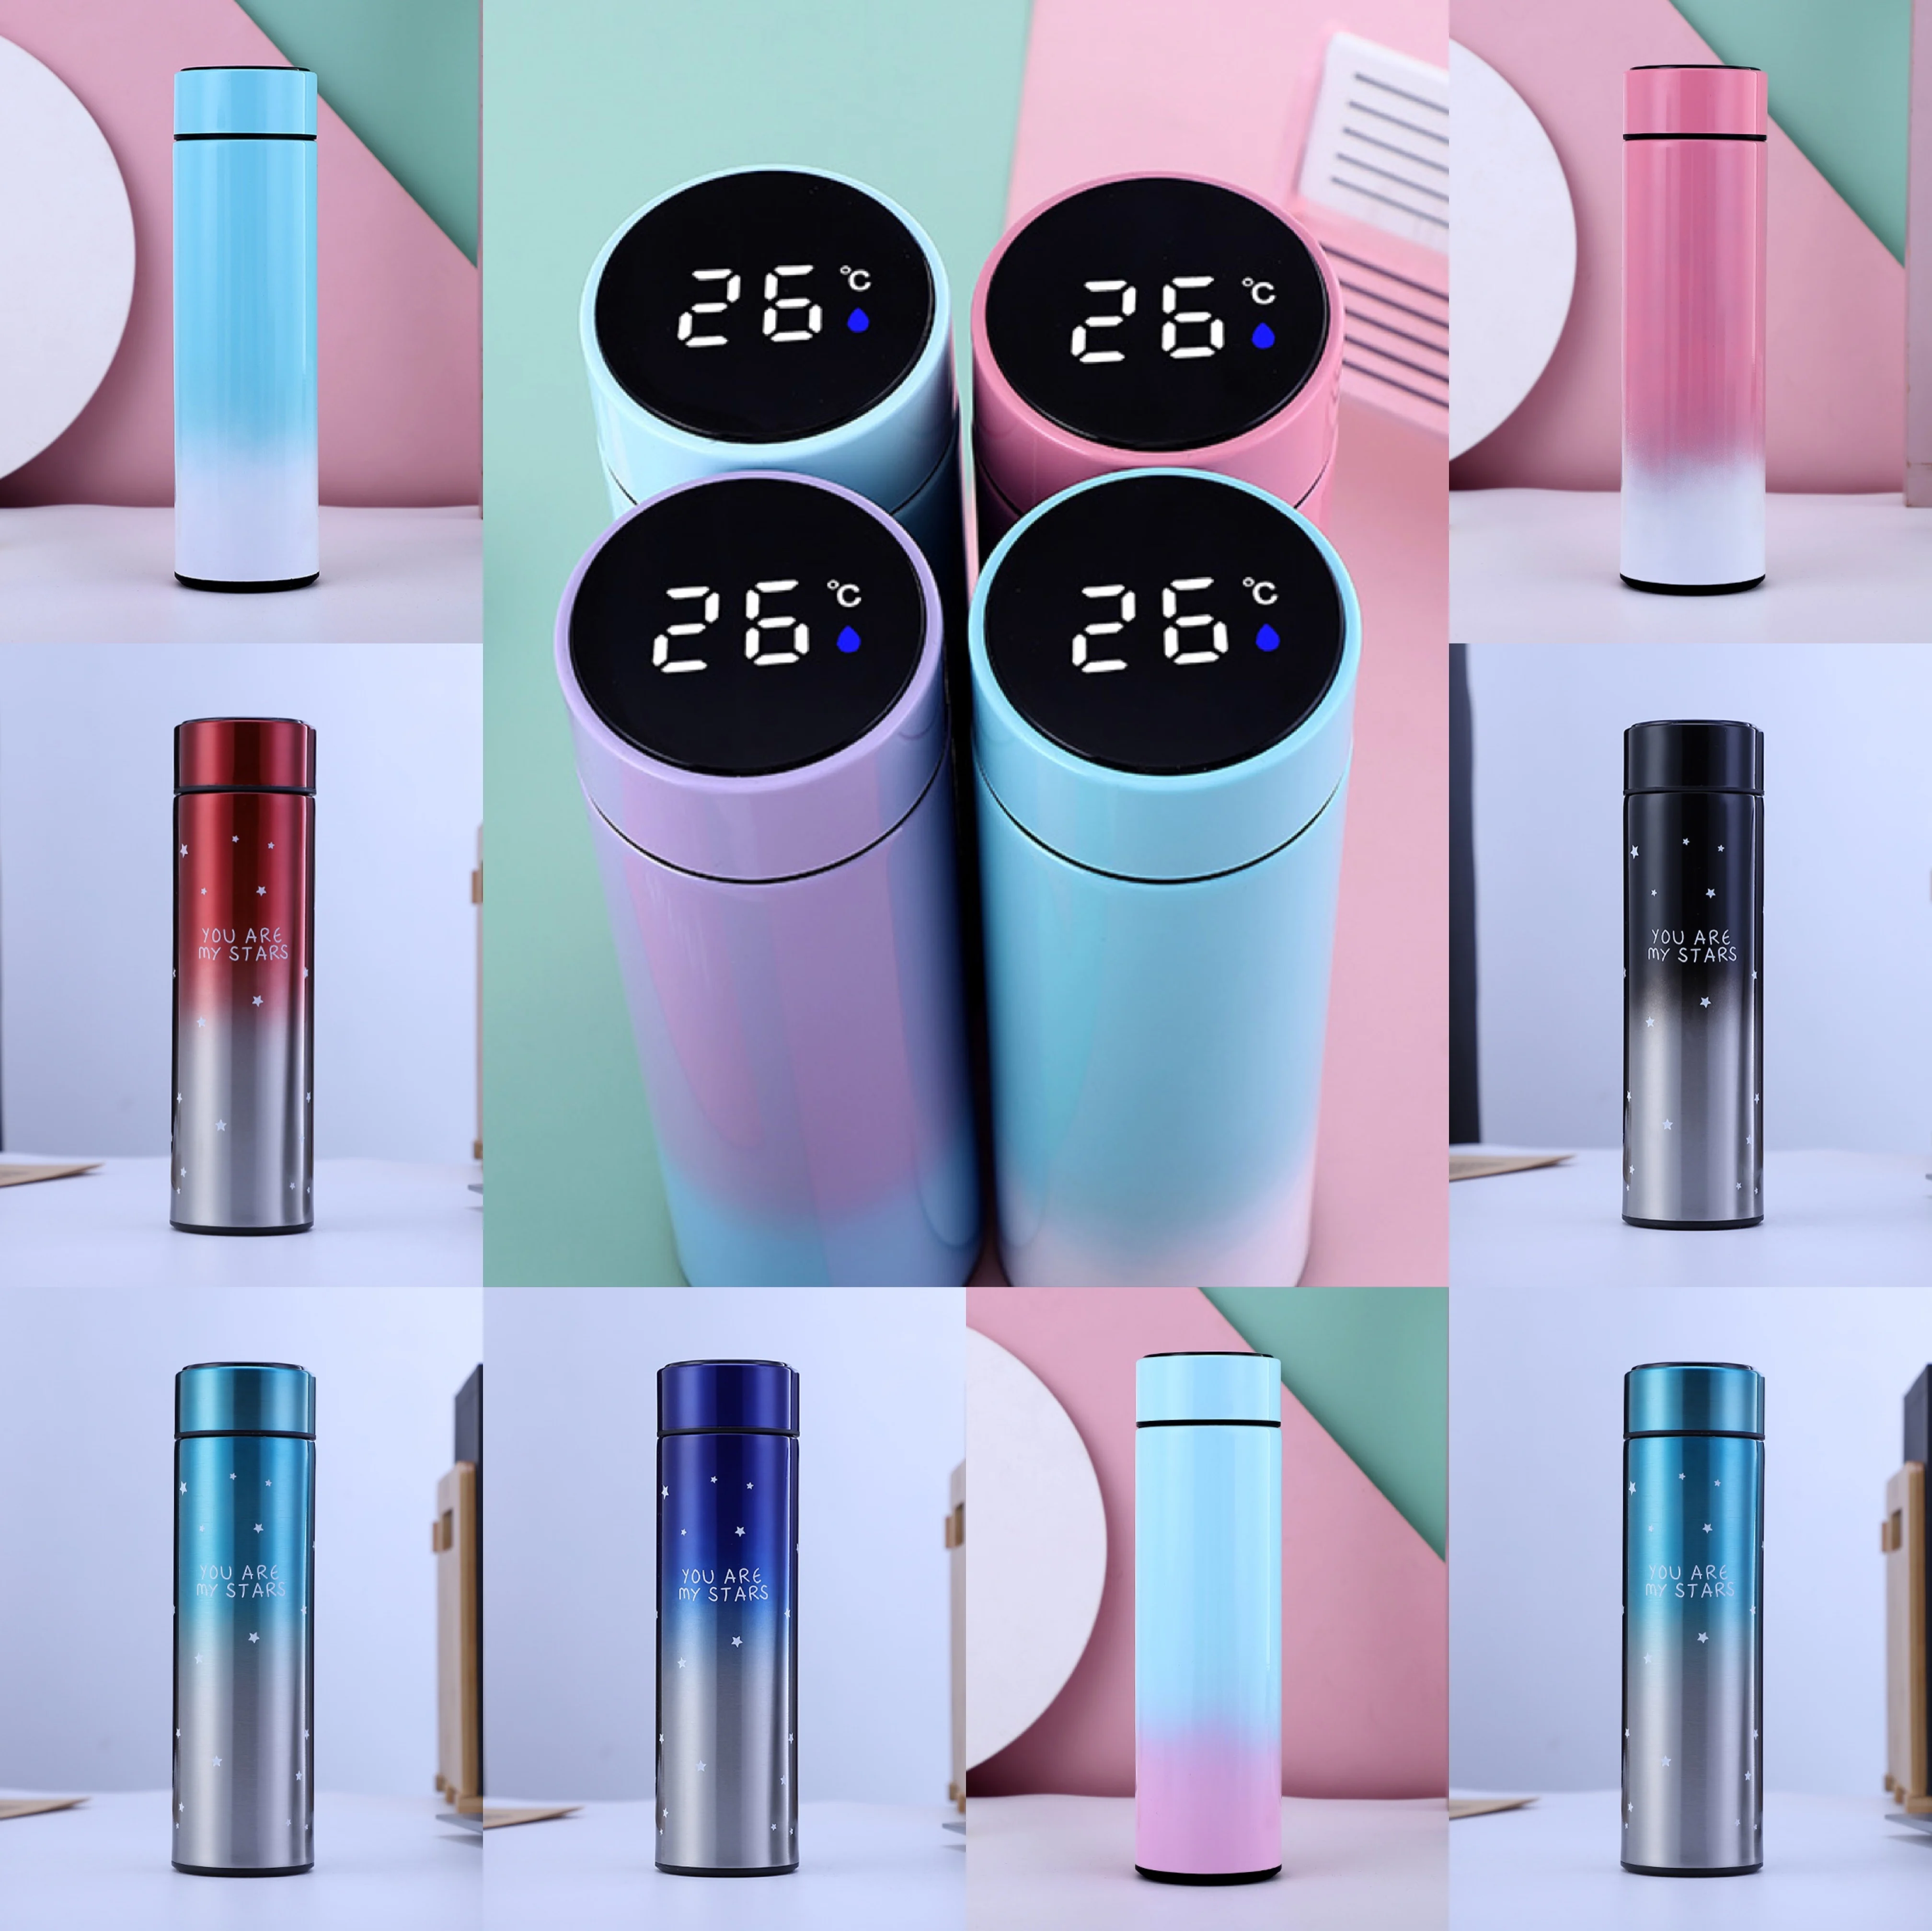 https://ae01.alicdn.com/kf/Hd0565d92086b4d32984db60e5f60d3e3W/LED-Temperature-Display-Vacuum-Thermal-Flask-304-Stainless-Steel-13-Colours-thermos-bottle-cute-water-bottle.jpg